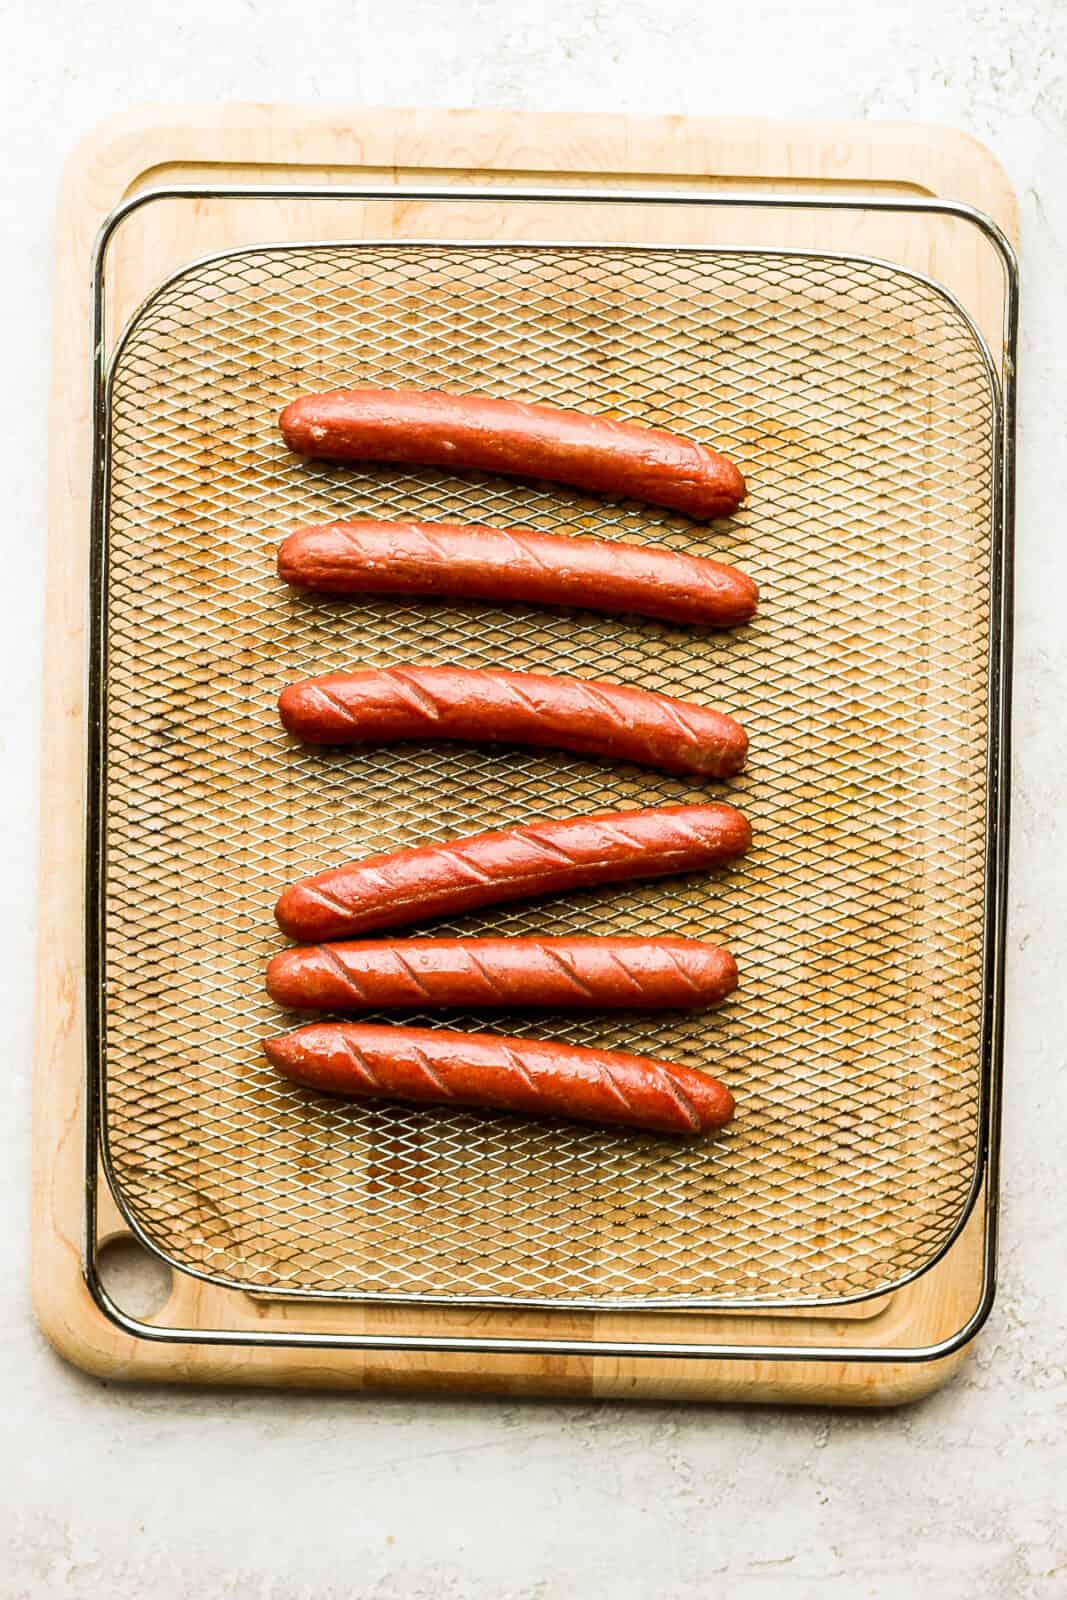 Six air fried hot dogs in an air fryer basket.